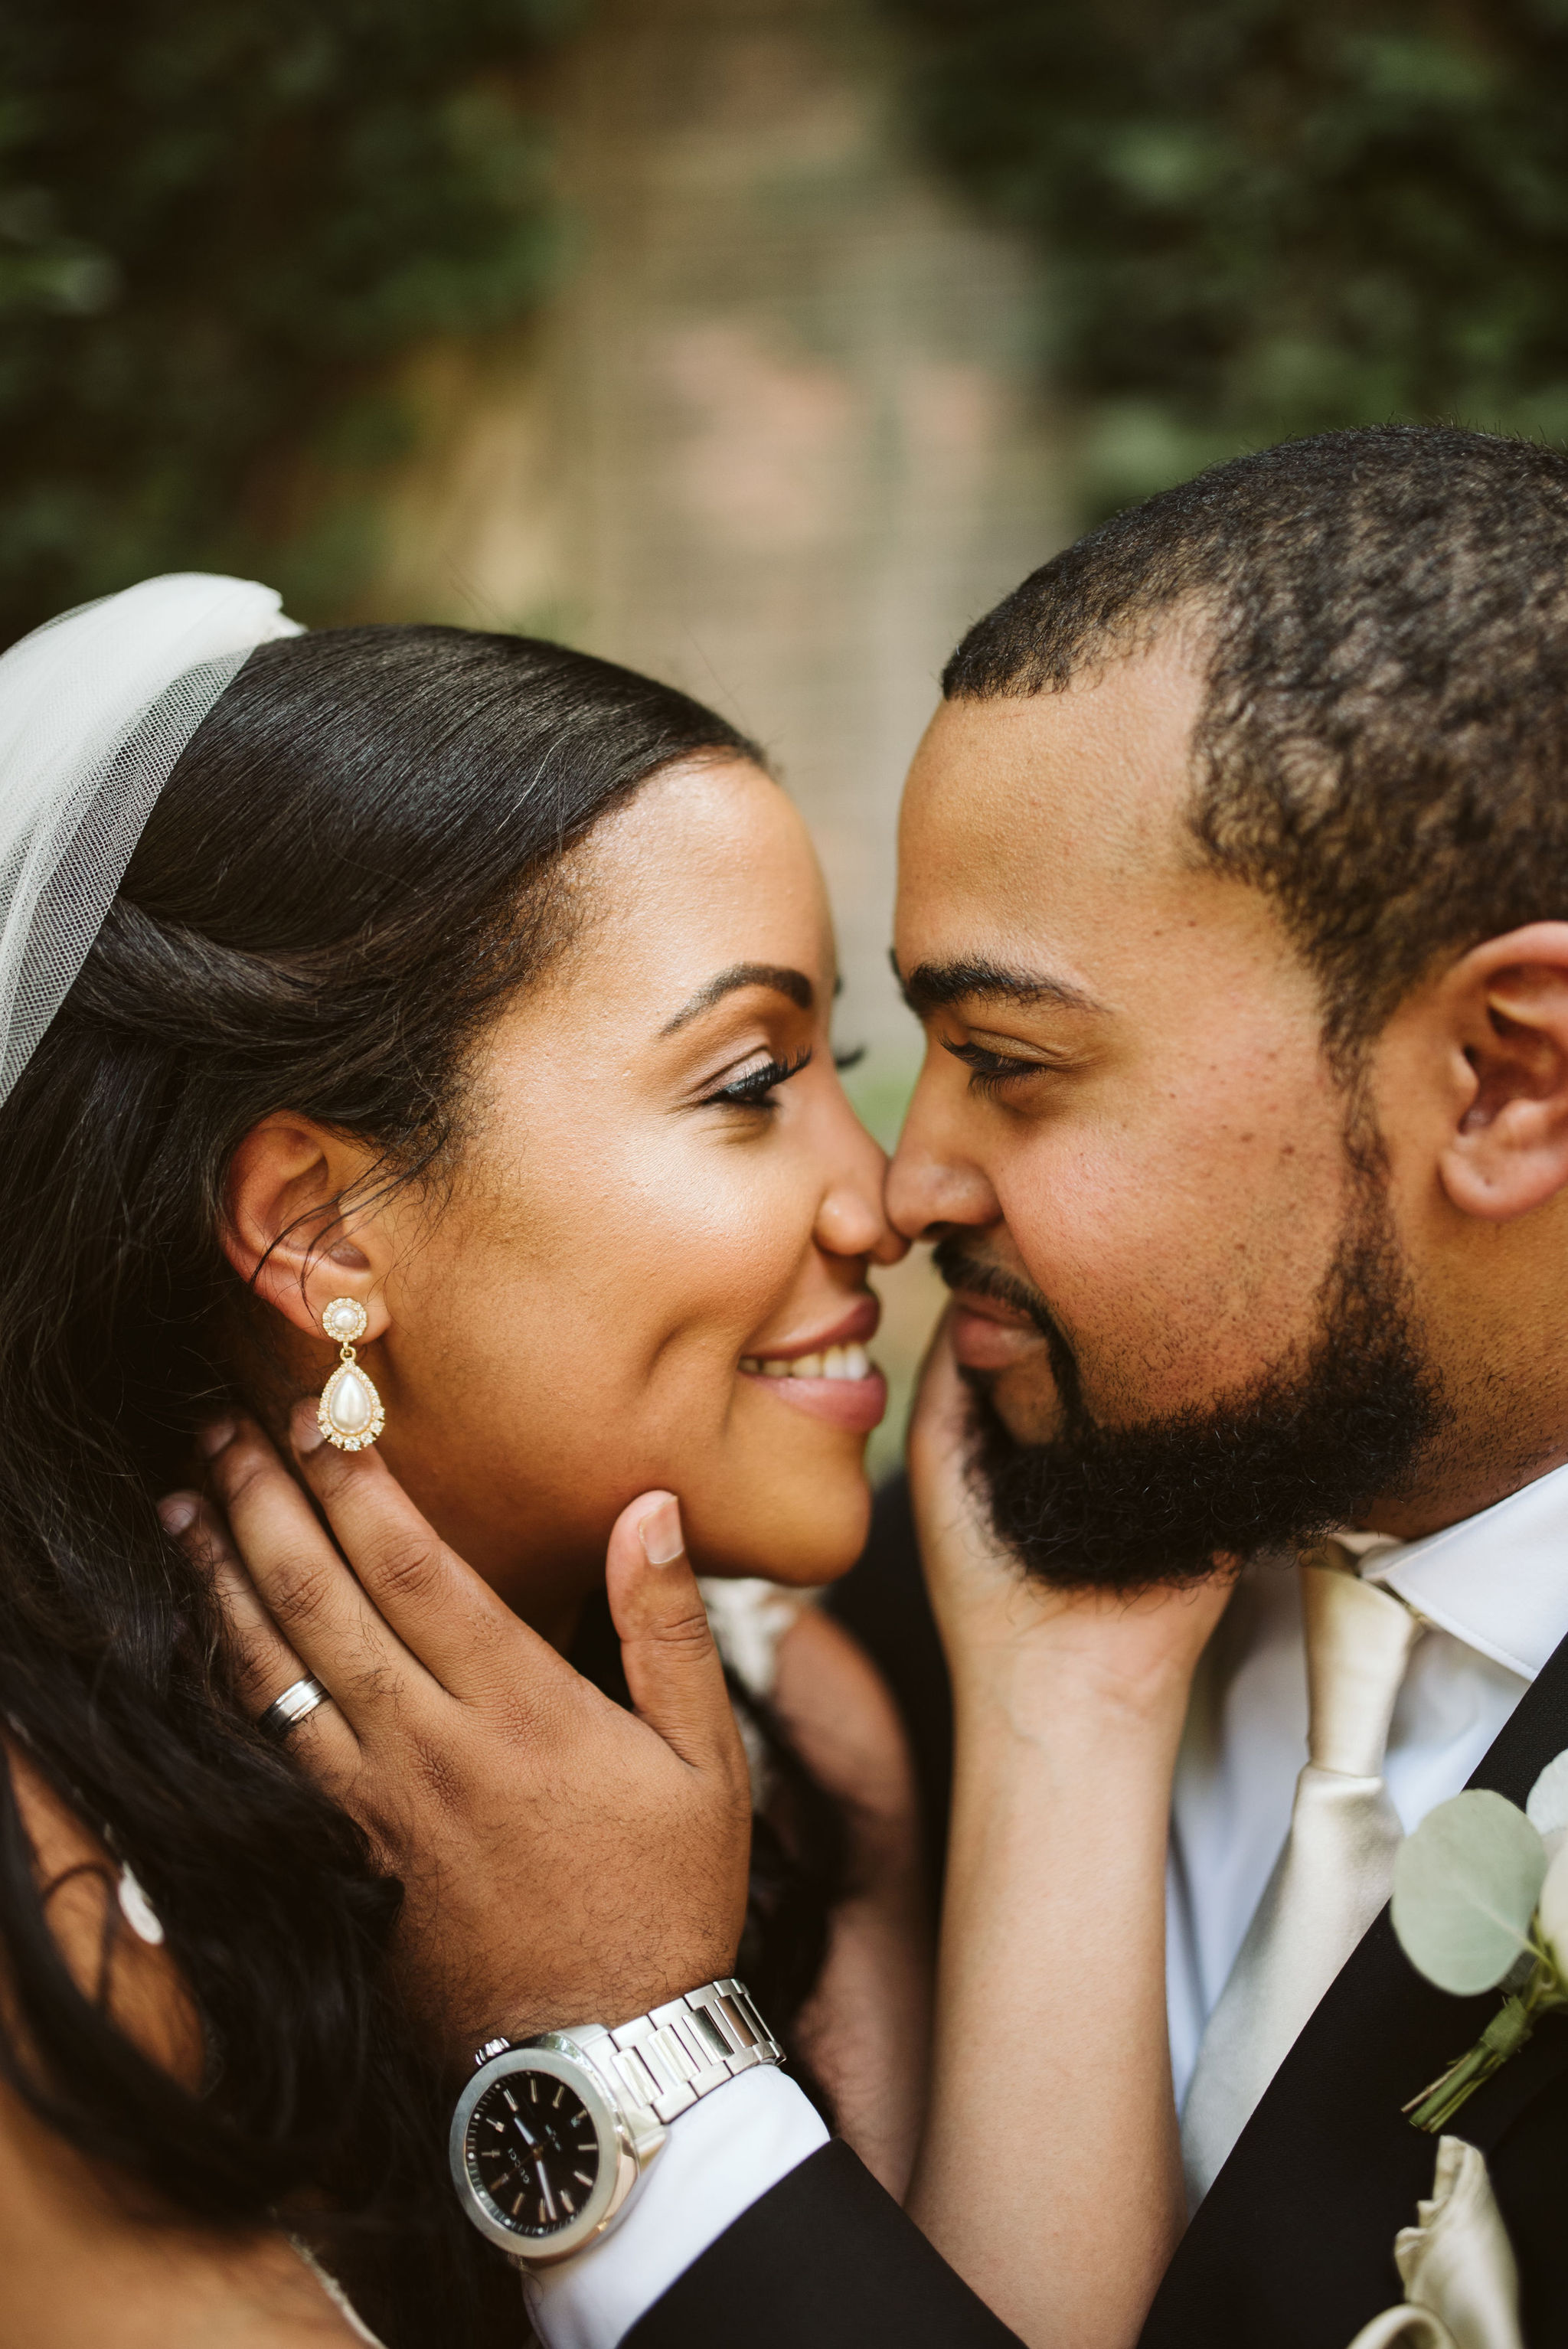  Baltimore, Maryland Wedding Photographer, Mount Vernon, Chase Court, Classic, Outdoor Ceremony, Garden, Romantic, Closeup Photo of Bride and groom Looking into Each Other’s Eyes, Wedding Jewelry 